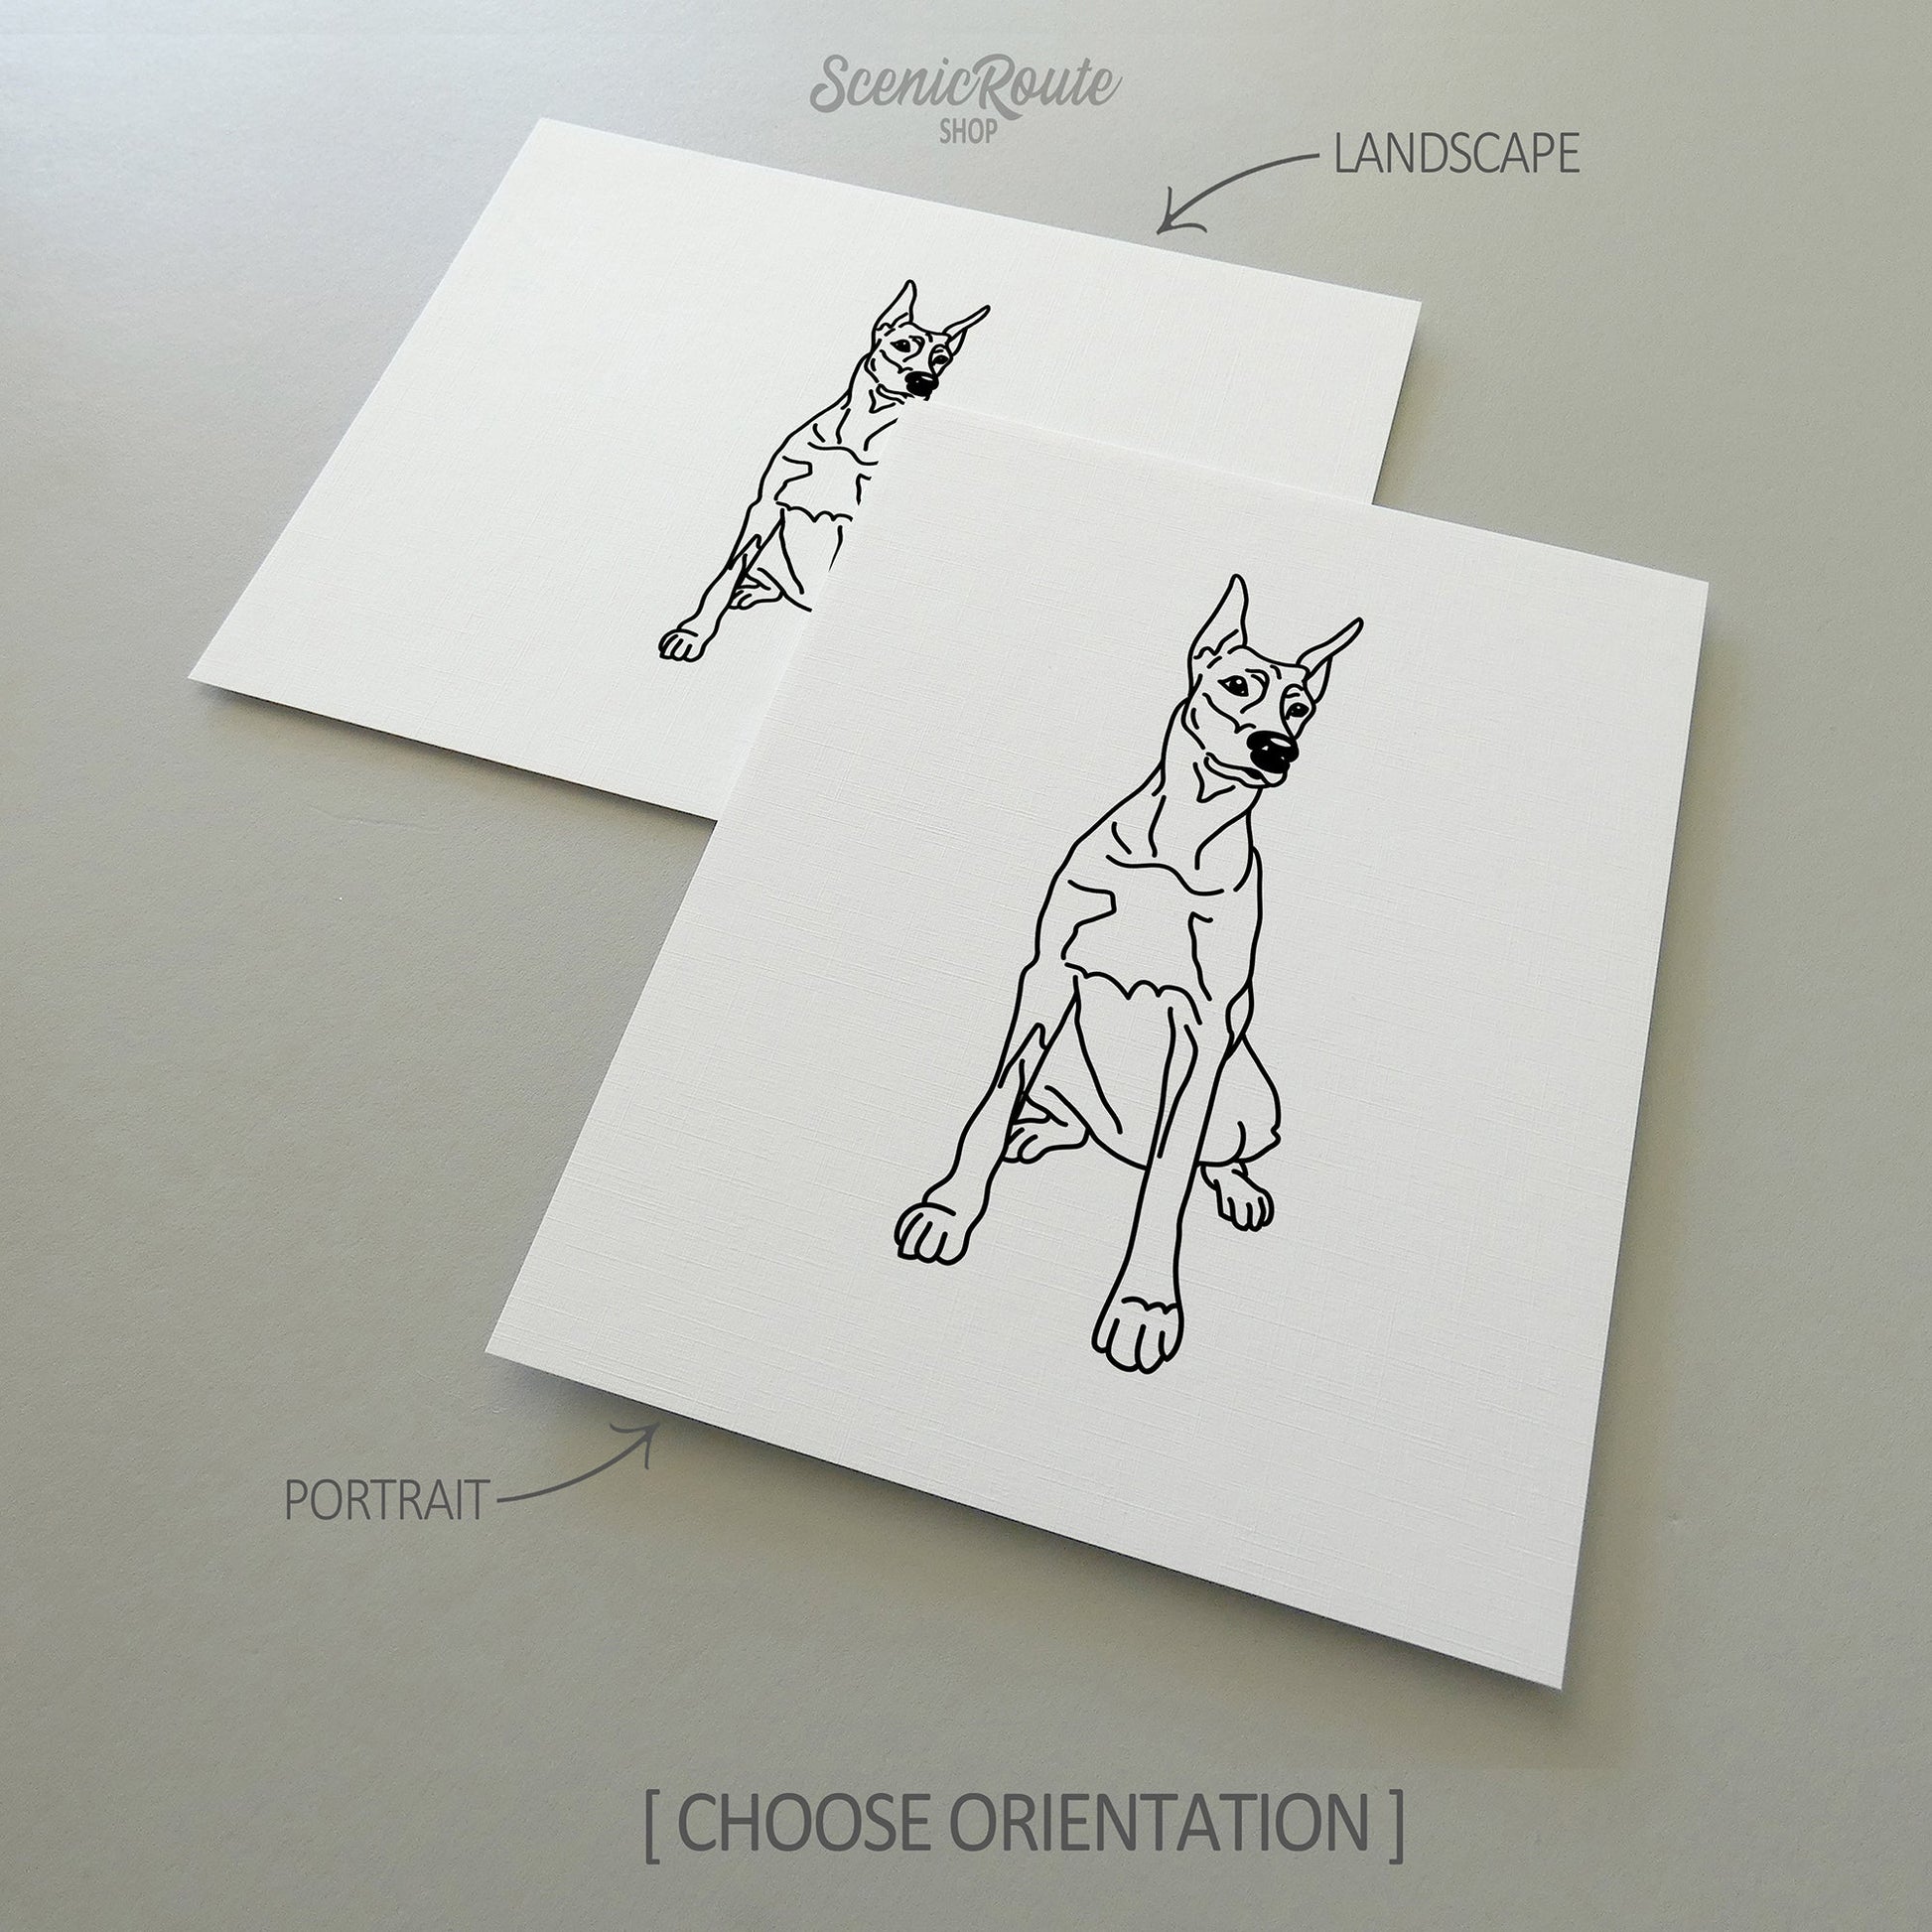 Two drawings of a Doberman dog on white linen paper with a gray background.  Pieces are shown in portrait and landscape orientation options to illustrate the available art print options.